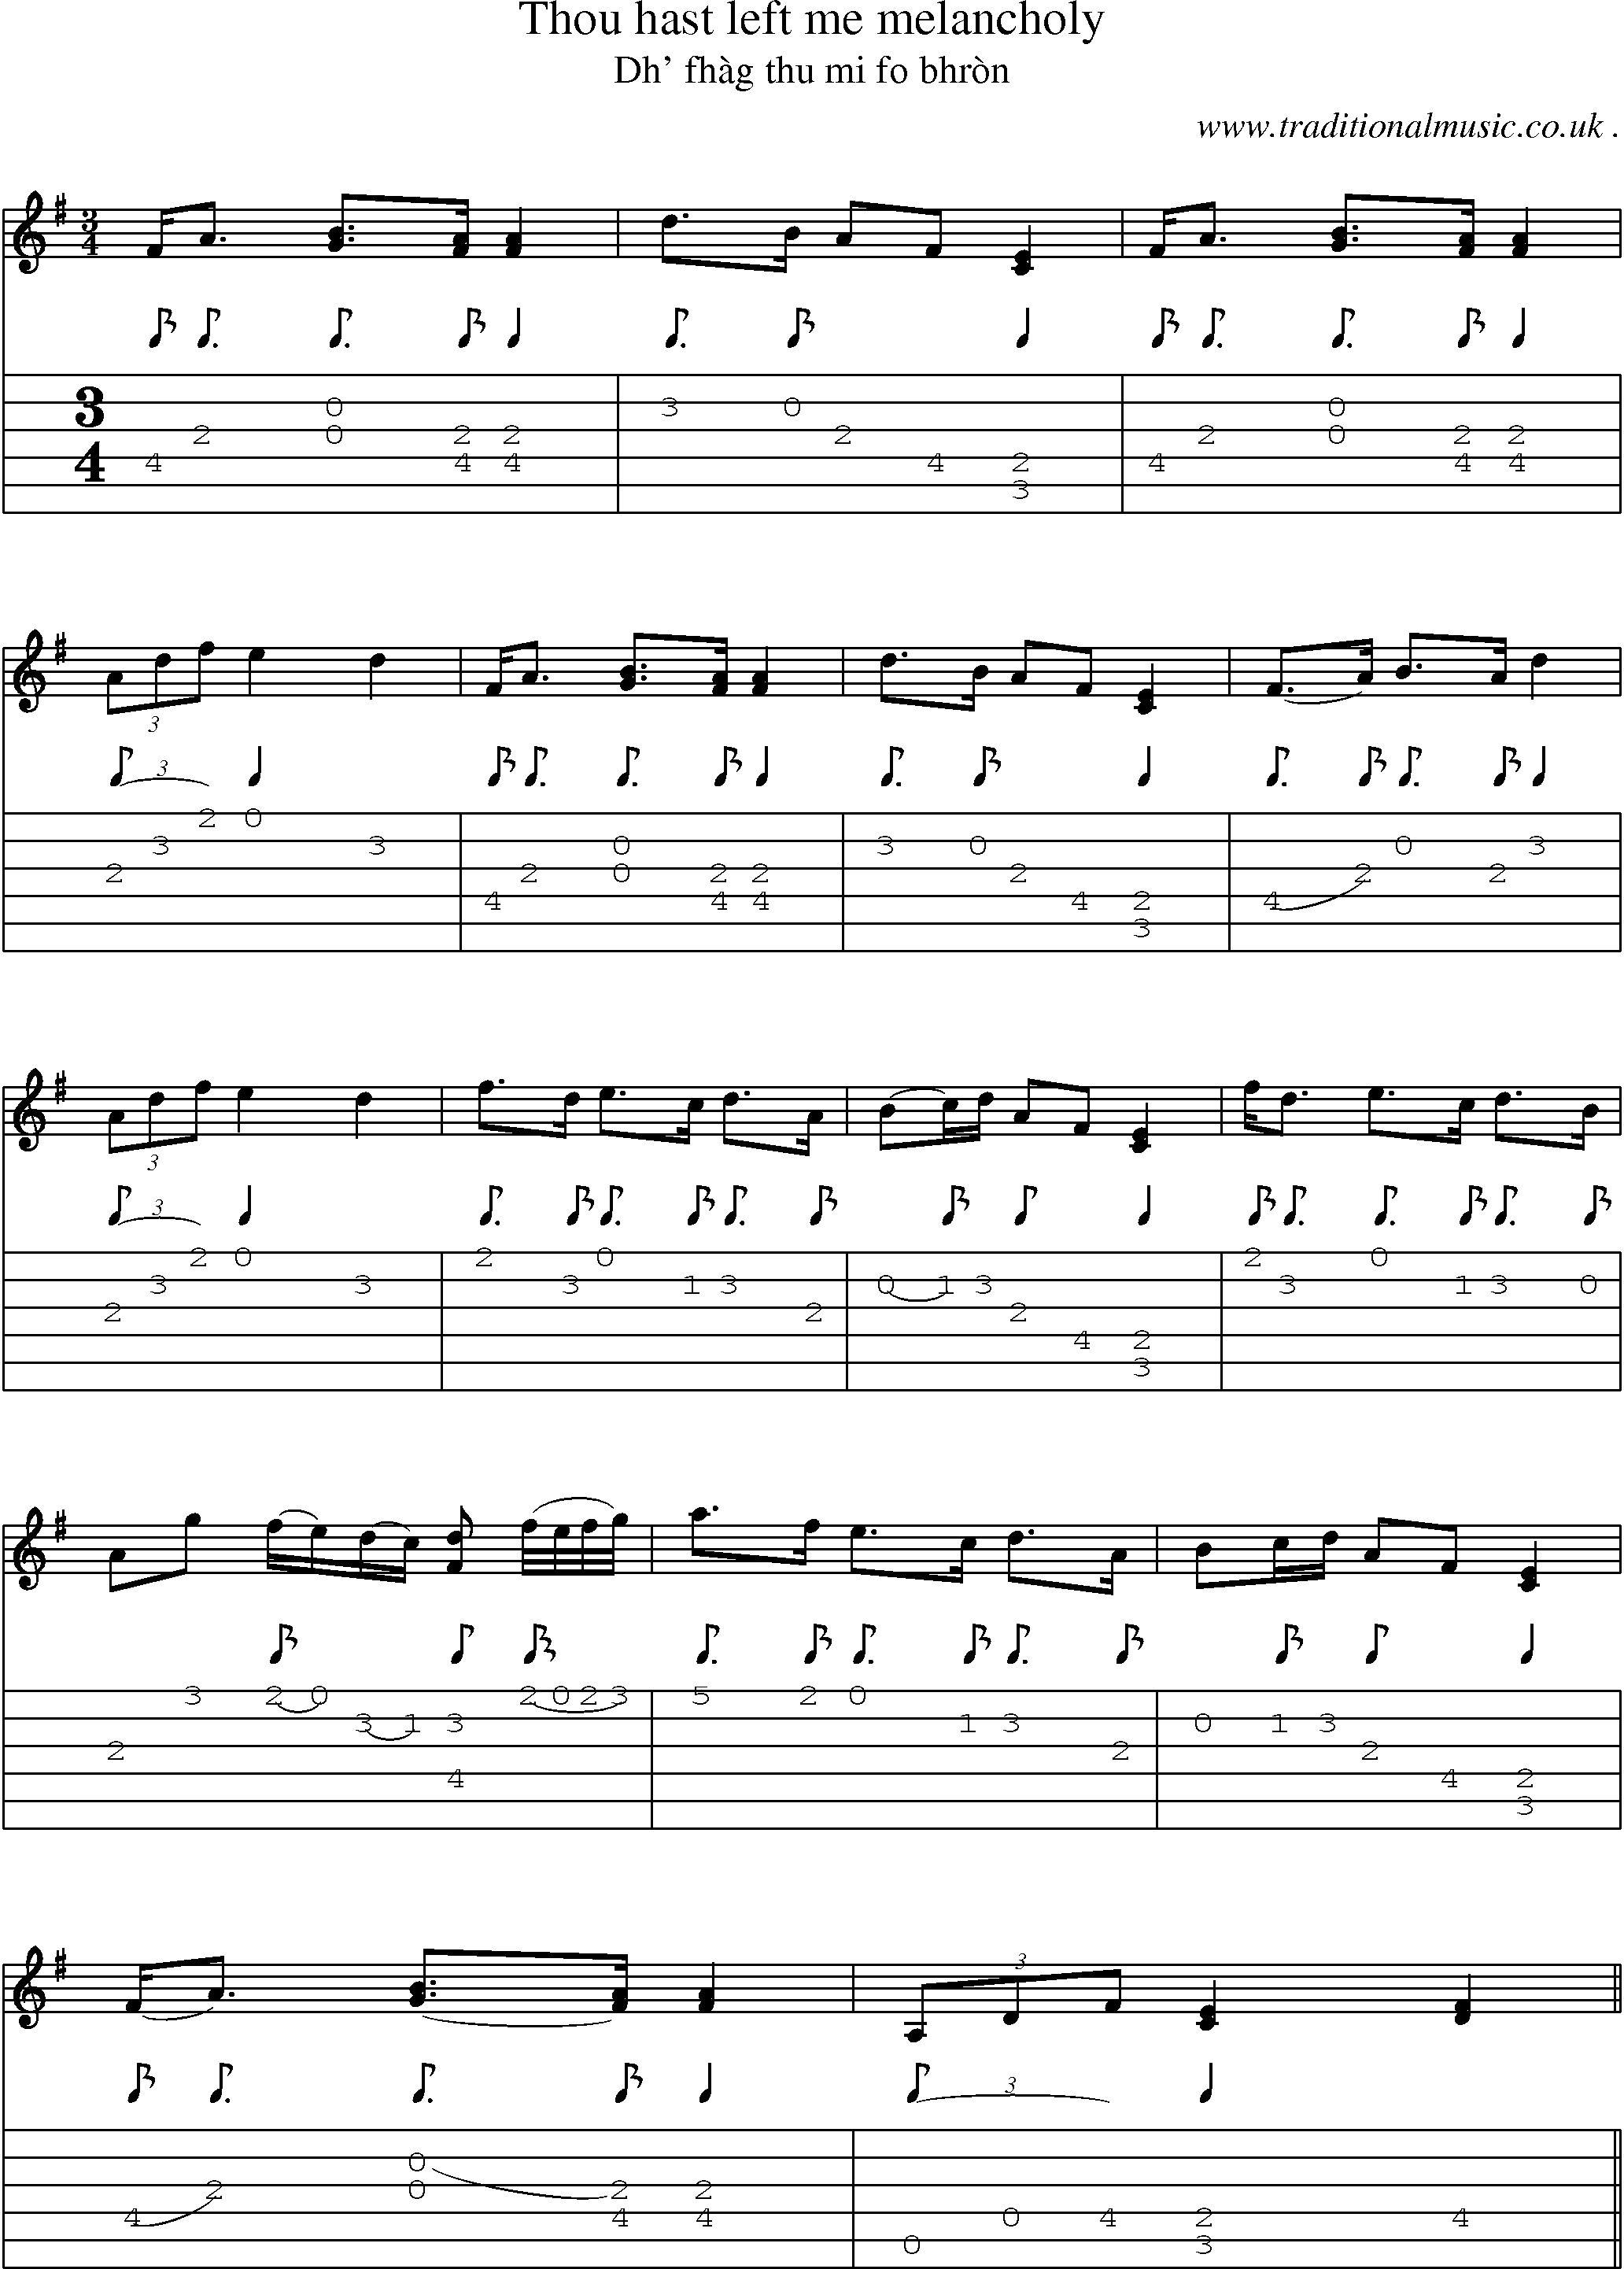 Sheet-music  score, Chords and Guitar Tabs for Thou Hast Left Me Melancholy